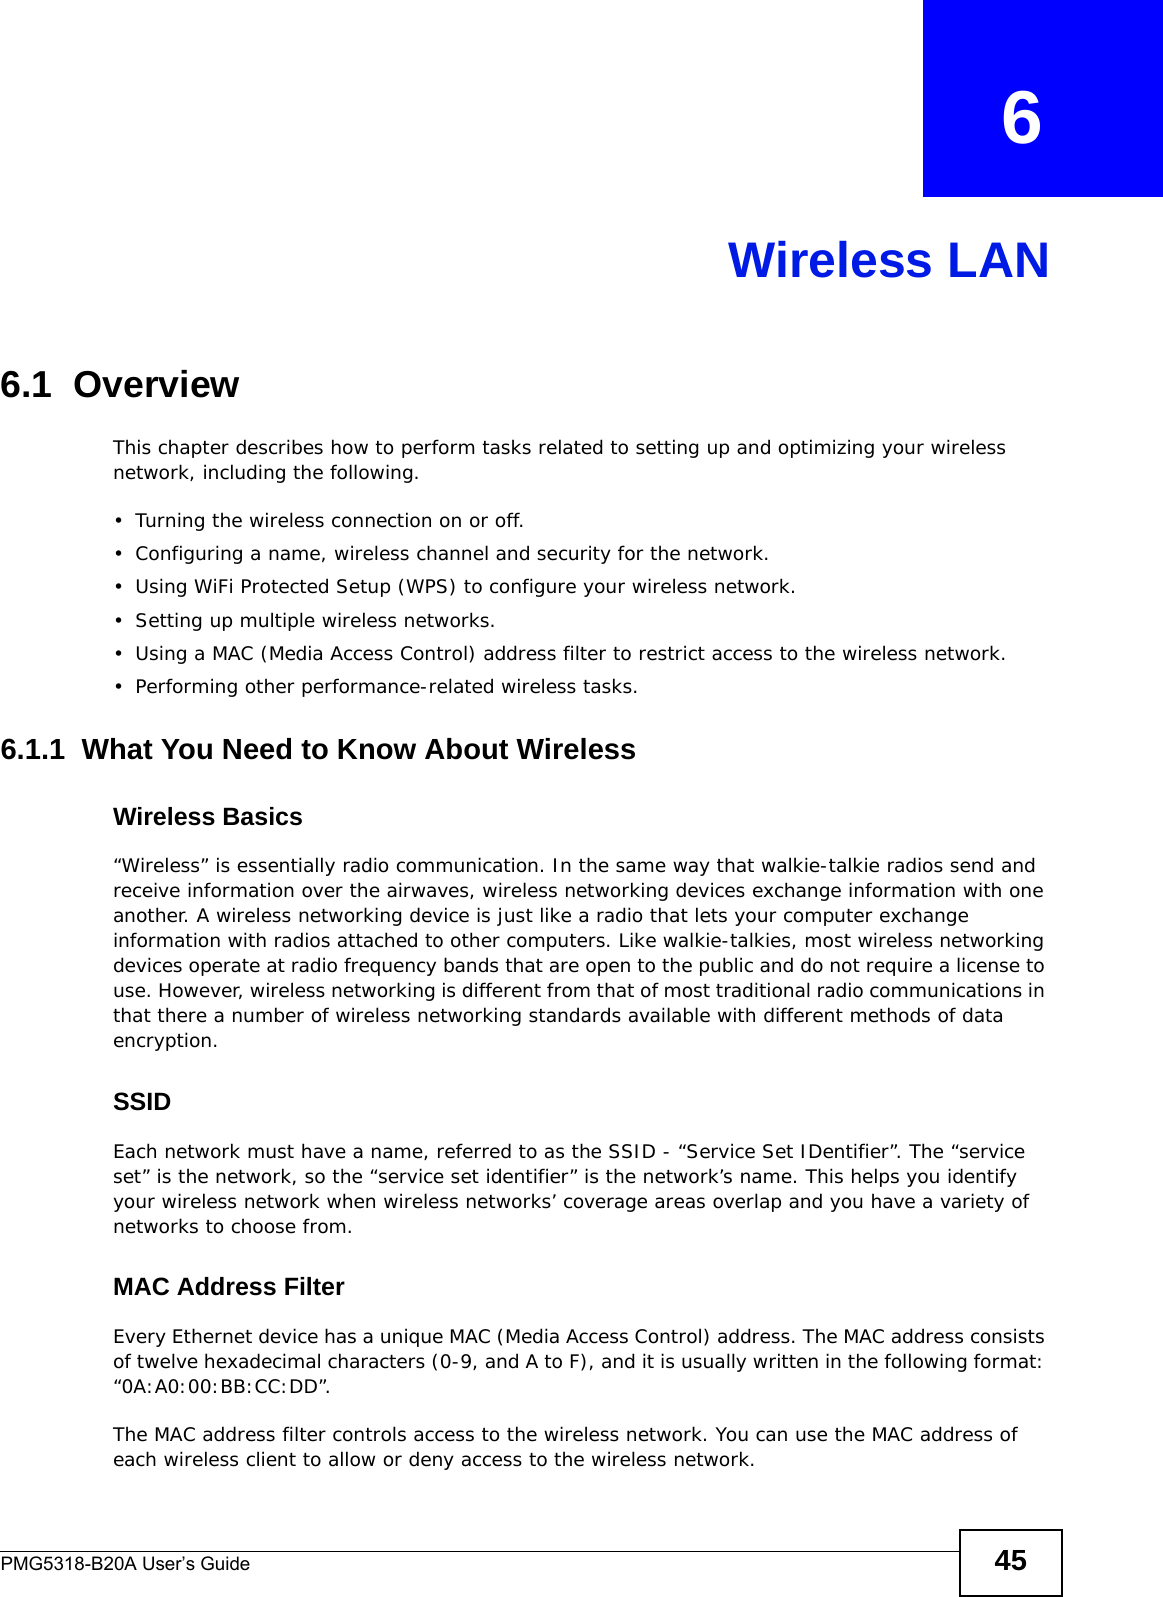 PMG5318-B20A User’s Guide 45CHAPTER   6Wireless LAN6.1  Overview This chapter describes how to perform tasks related to setting up and optimizing your wireless network, including the following.• Turning the wireless connection on or off.• Configuring a name, wireless channel and security for the network.• Using WiFi Protected Setup (WPS) to configure your wireless network.• Setting up multiple wireless networks.• Using a MAC (Media Access Control) address filter to restrict access to the wireless network.• Performing other performance-related wireless tasks.6.1.1  What You Need to Know About WirelessWireless Basics“Wireless” is essentially radio communication. In the same way that walkie-talkie radios send and receive information over the airwaves, wireless networking devices exchange information with one another. A wireless networking device is just like a radio that lets your computer exchange information with radios attached to other computers. Like walkie-talkies, most wireless networking devices operate at radio frequency bands that are open to the public and do not require a license to use. However, wireless networking is different from that of most traditional radio communications in that there a number of wireless networking standards available with different methods of data encryption.SSIDEach network must have a name, referred to as the SSID - “Service Set IDentifier”. The “service set” is the network, so the “service set identifier” is the network’s name. This helps you identify your wireless network when wireless networks’ coverage areas overlap and you have a variety of networks to choose from. MAC Address FilterEvery Ethernet device has a unique MAC (Media Access Control) address. The MAC address consists of twelve hexadecimal characters (0-9, and A to F), and it is usually written in the following format: “0A:A0:00:BB:CC:DD”. The MAC address filter controls access to the wireless network. You can use the MAC address of each wireless client to allow or deny access to the wireless network.